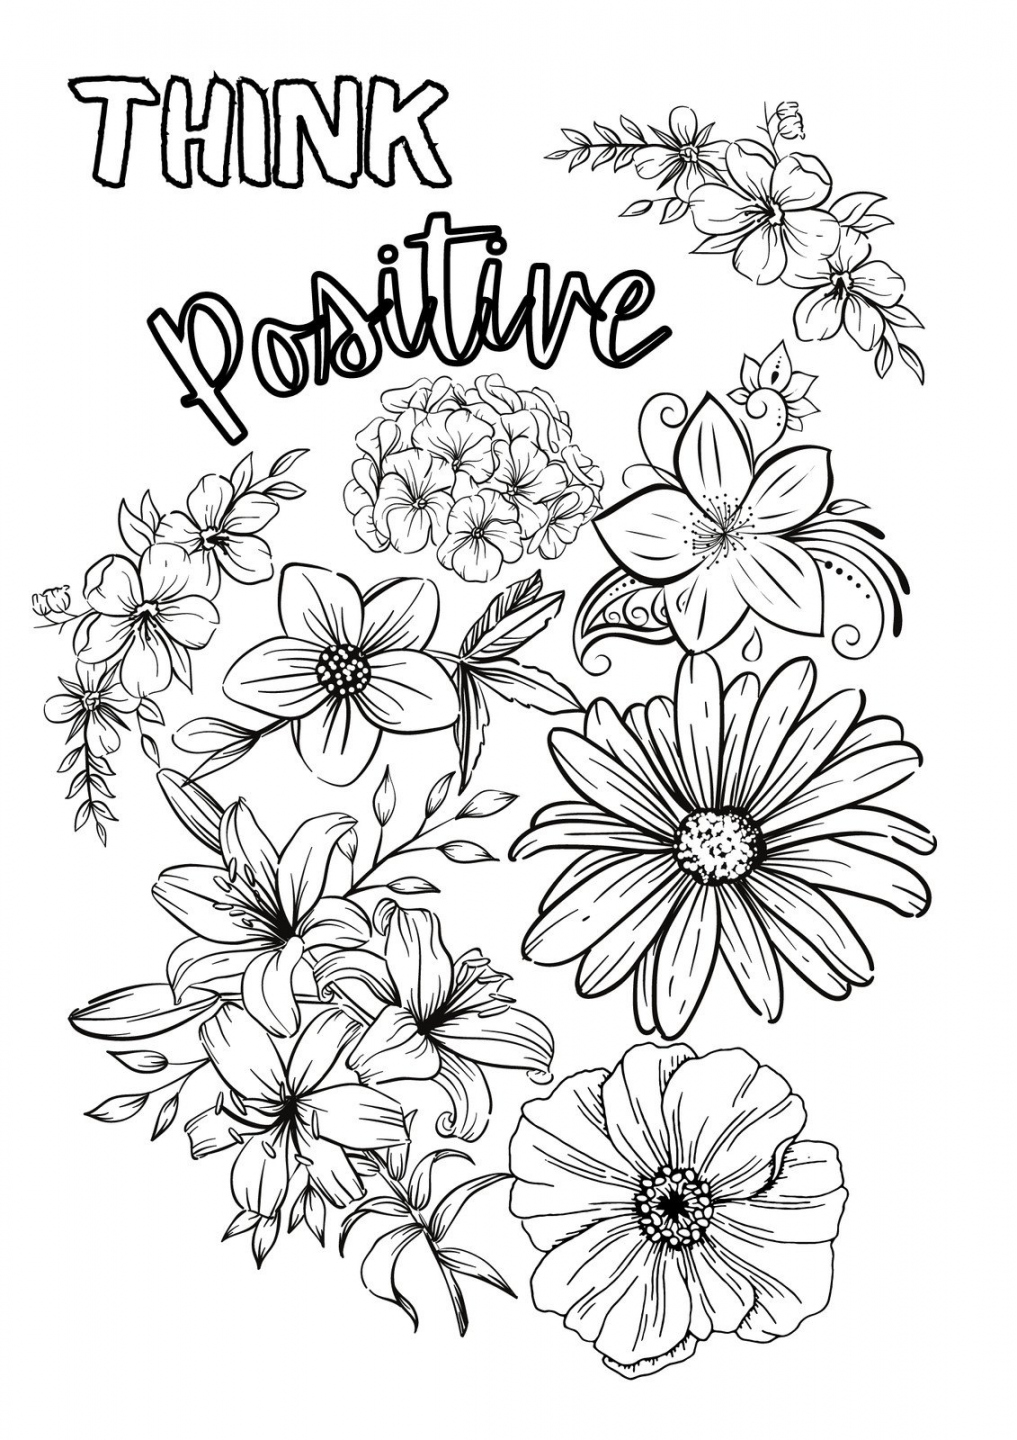 Coloring Sheets Printable Free - Printable - Free printable coloring page templates to customize  Canva